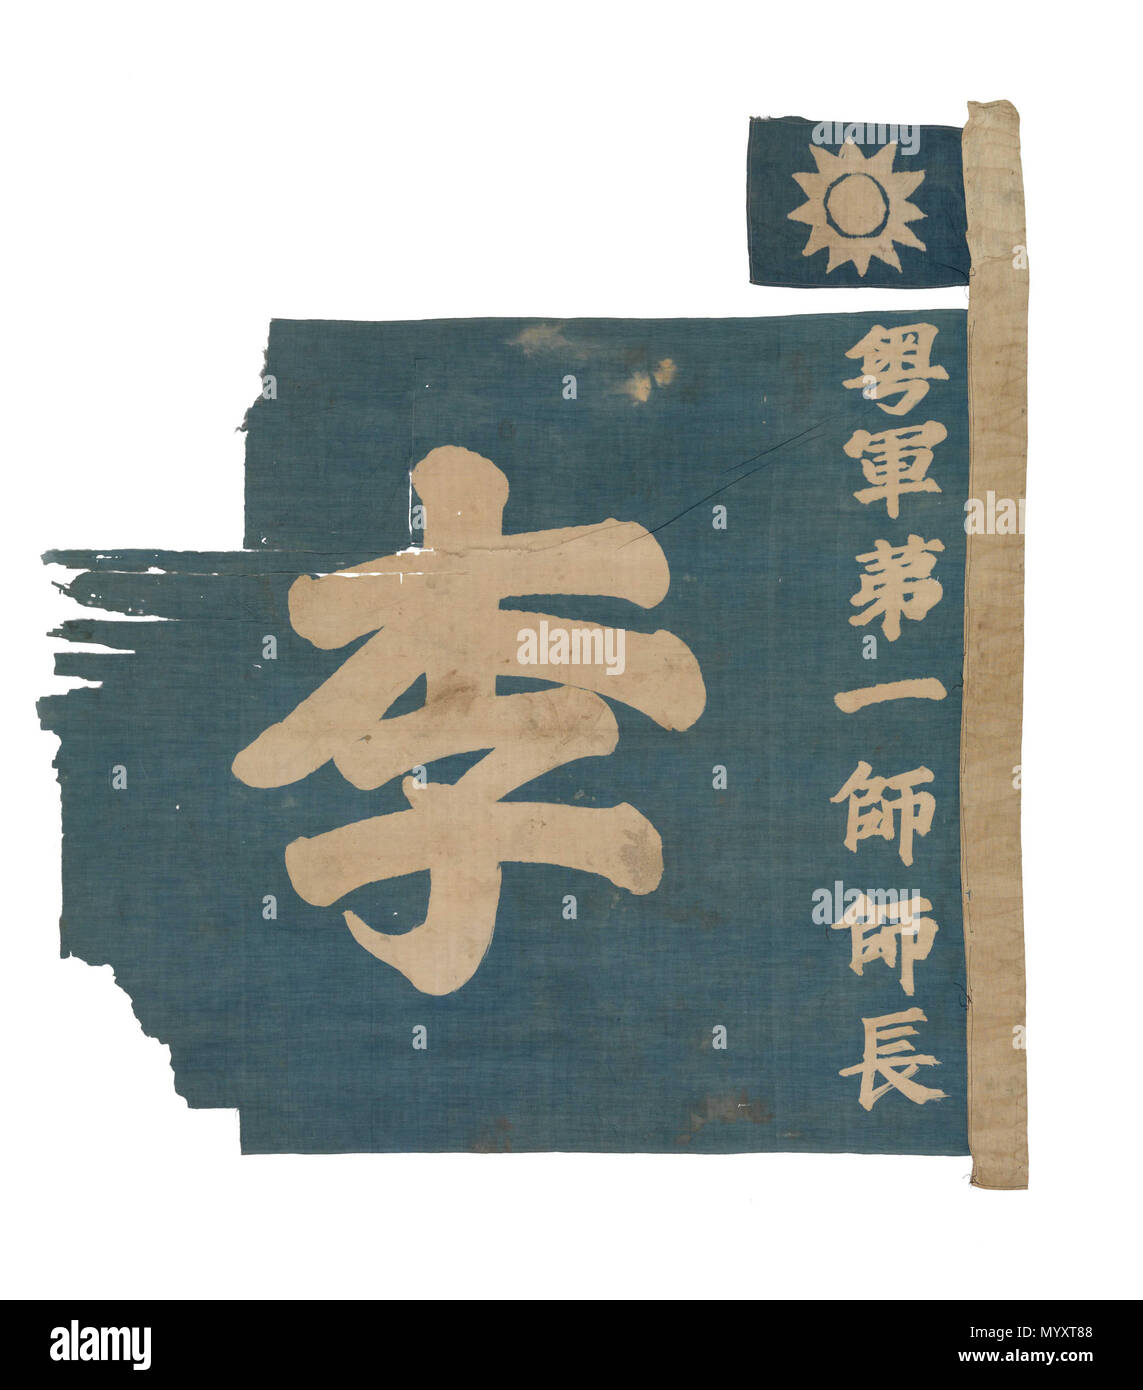 .  English: Chinese False Colours A flag captured from a Chinese pirate steam launch by Lieutenant J.A.H. Hunter of HMS 'Nessus' during 1926 in the Canton Region. It consists of two flags on the same hoist. The smaller upper one shows the Kuomintang white sun in a blue sky design. The lower flag has the Chinese characters 'YUE JUN DIYI SHI SHIZHANG' (Flag of the Divisional Commander of the First Division of the Army of Guangdong) and the large single character 'Li' (the surname of Li Jishen, commander in chief of the Guangdong Army). The characters are resist dyed, showing white on a blue back Stock Photo